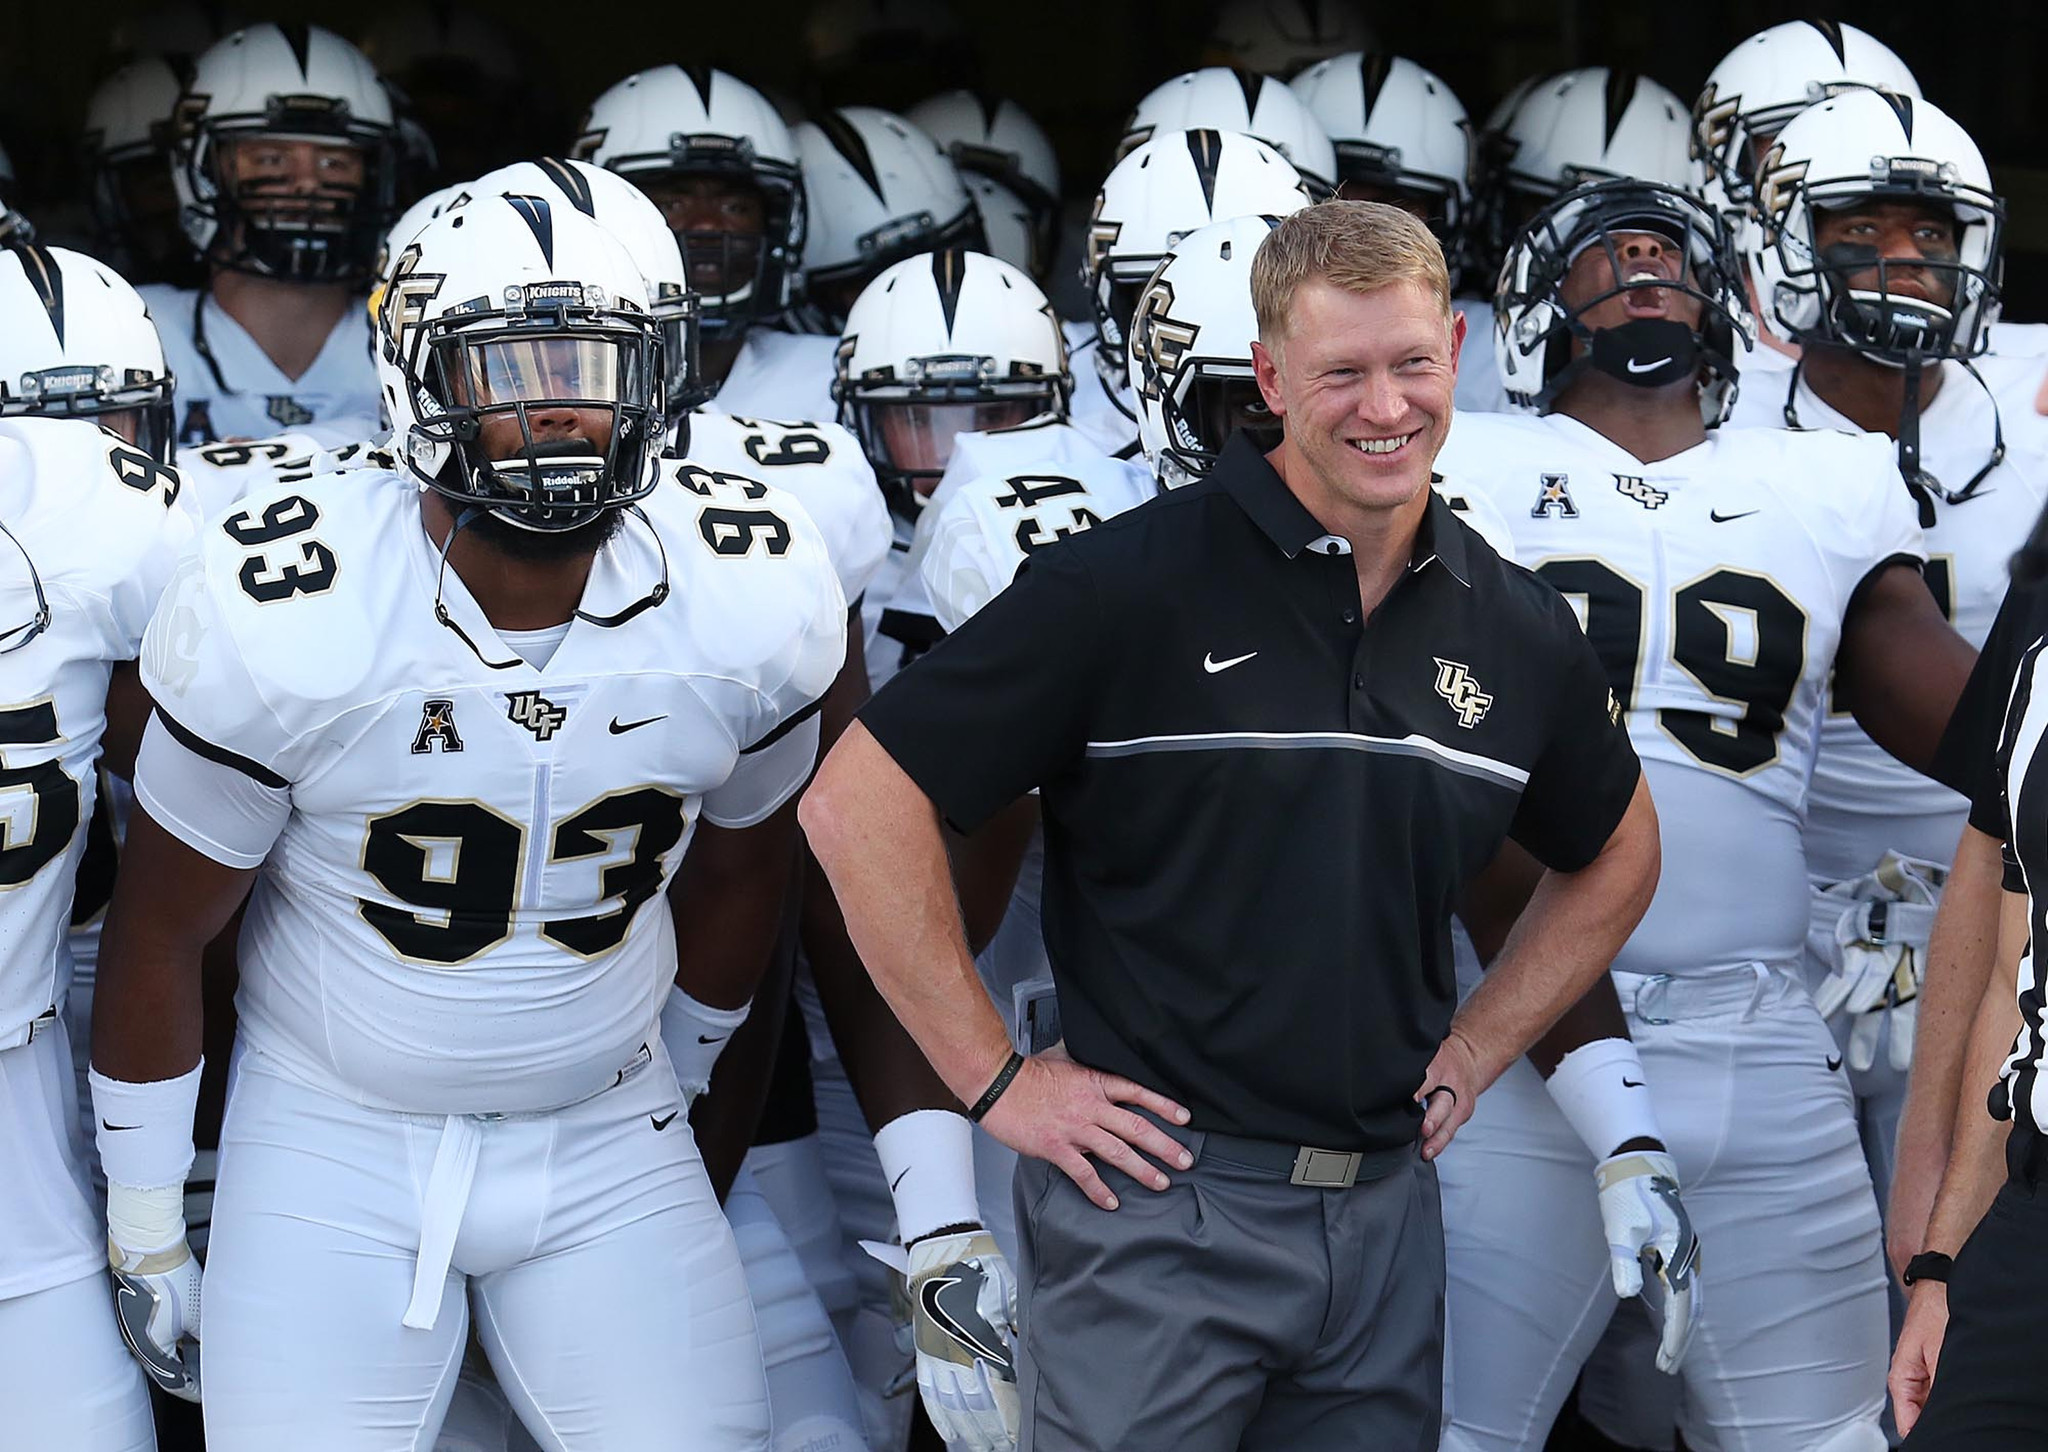 os-scott-frost-ucf-mike-bianchi-1006-20161005